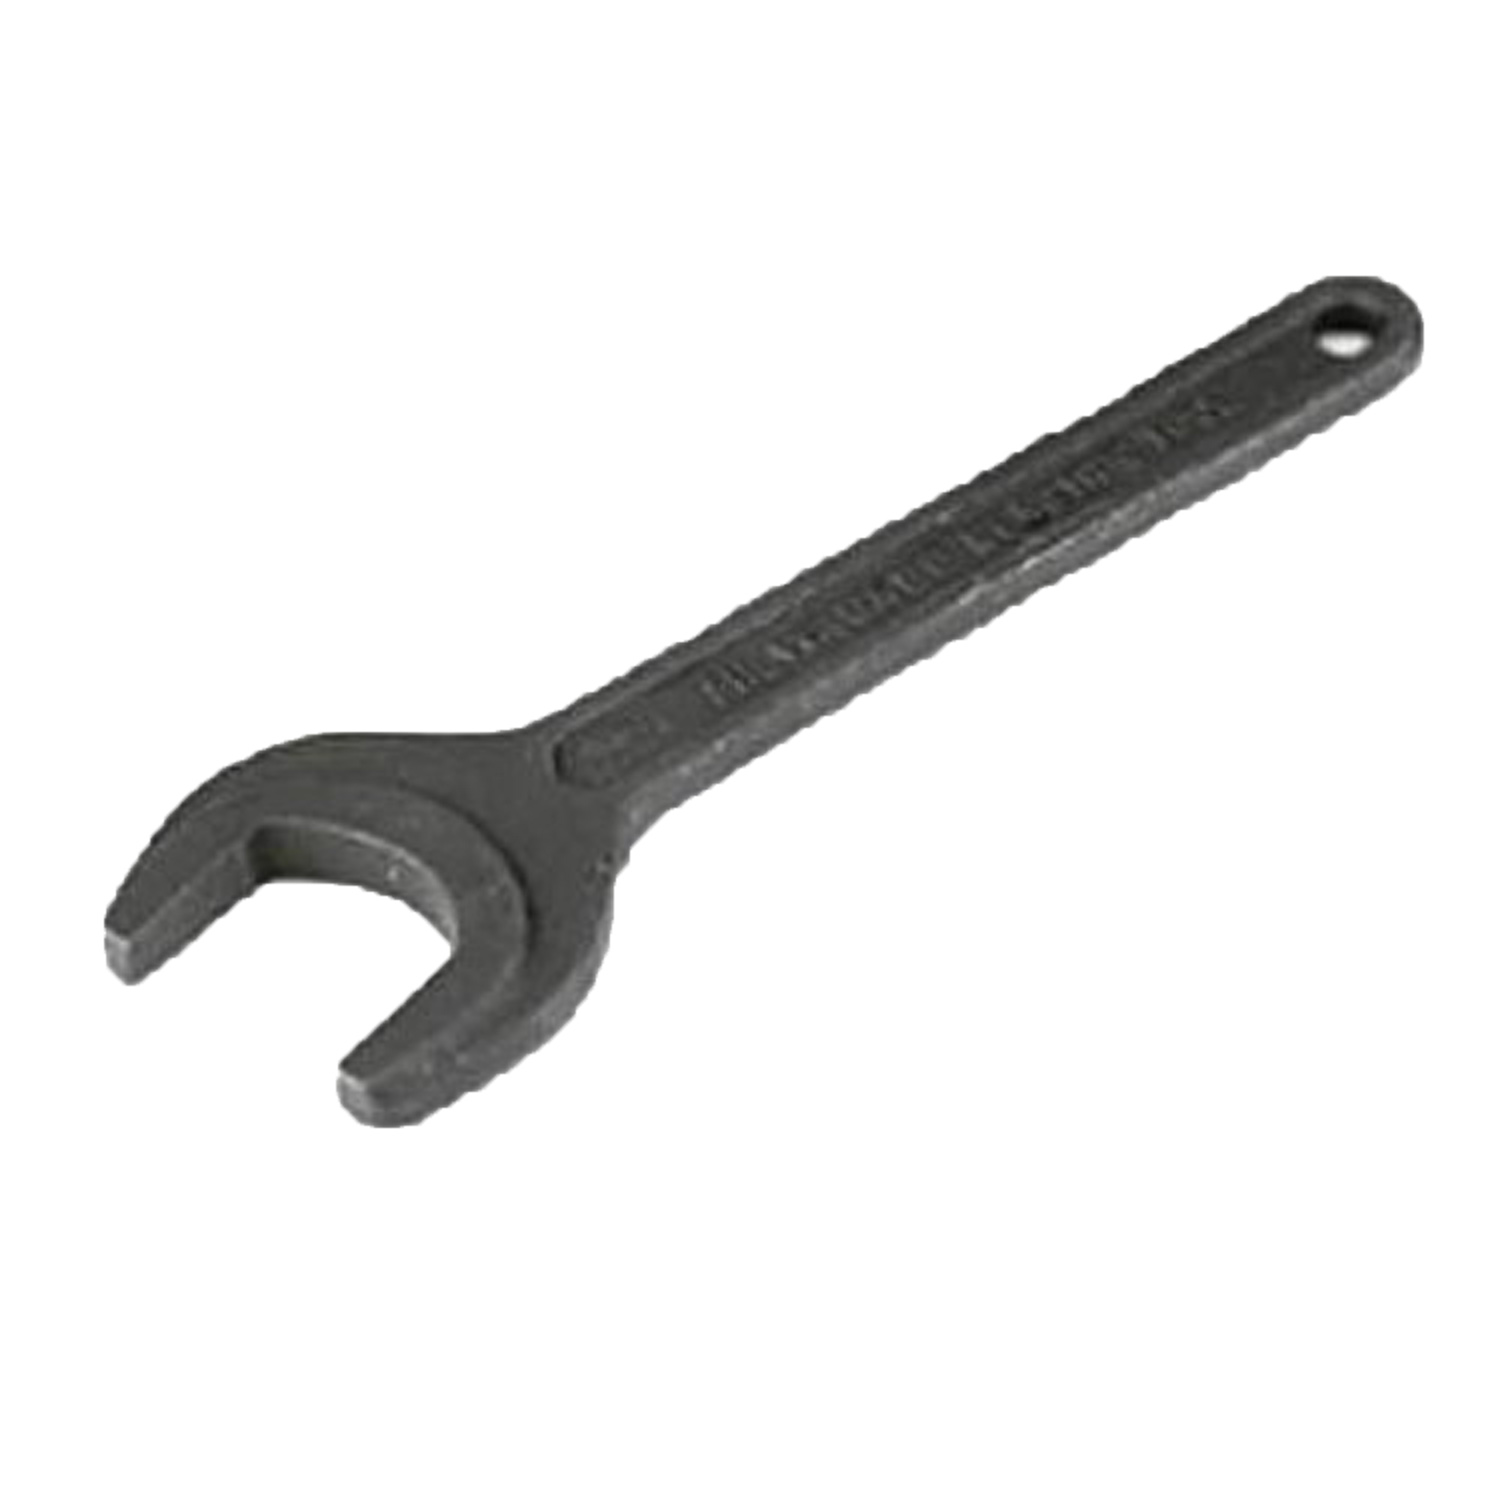 1/2" OPEN END WRENCH